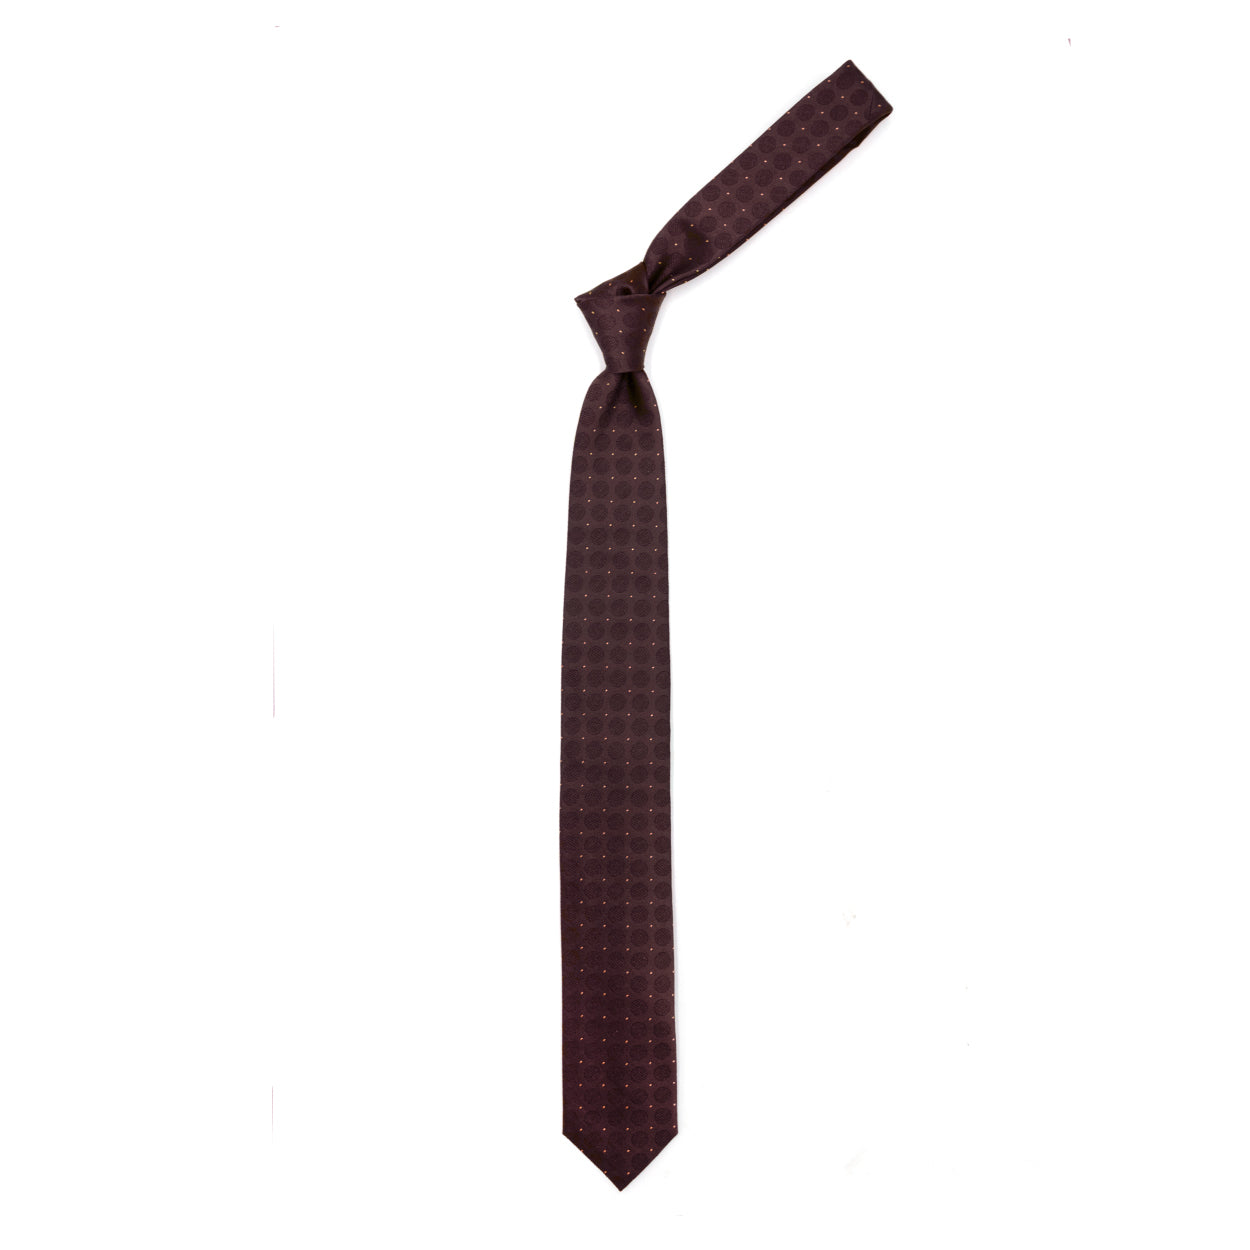 Burgundy tie with tone-on-tone circles and yellow dots